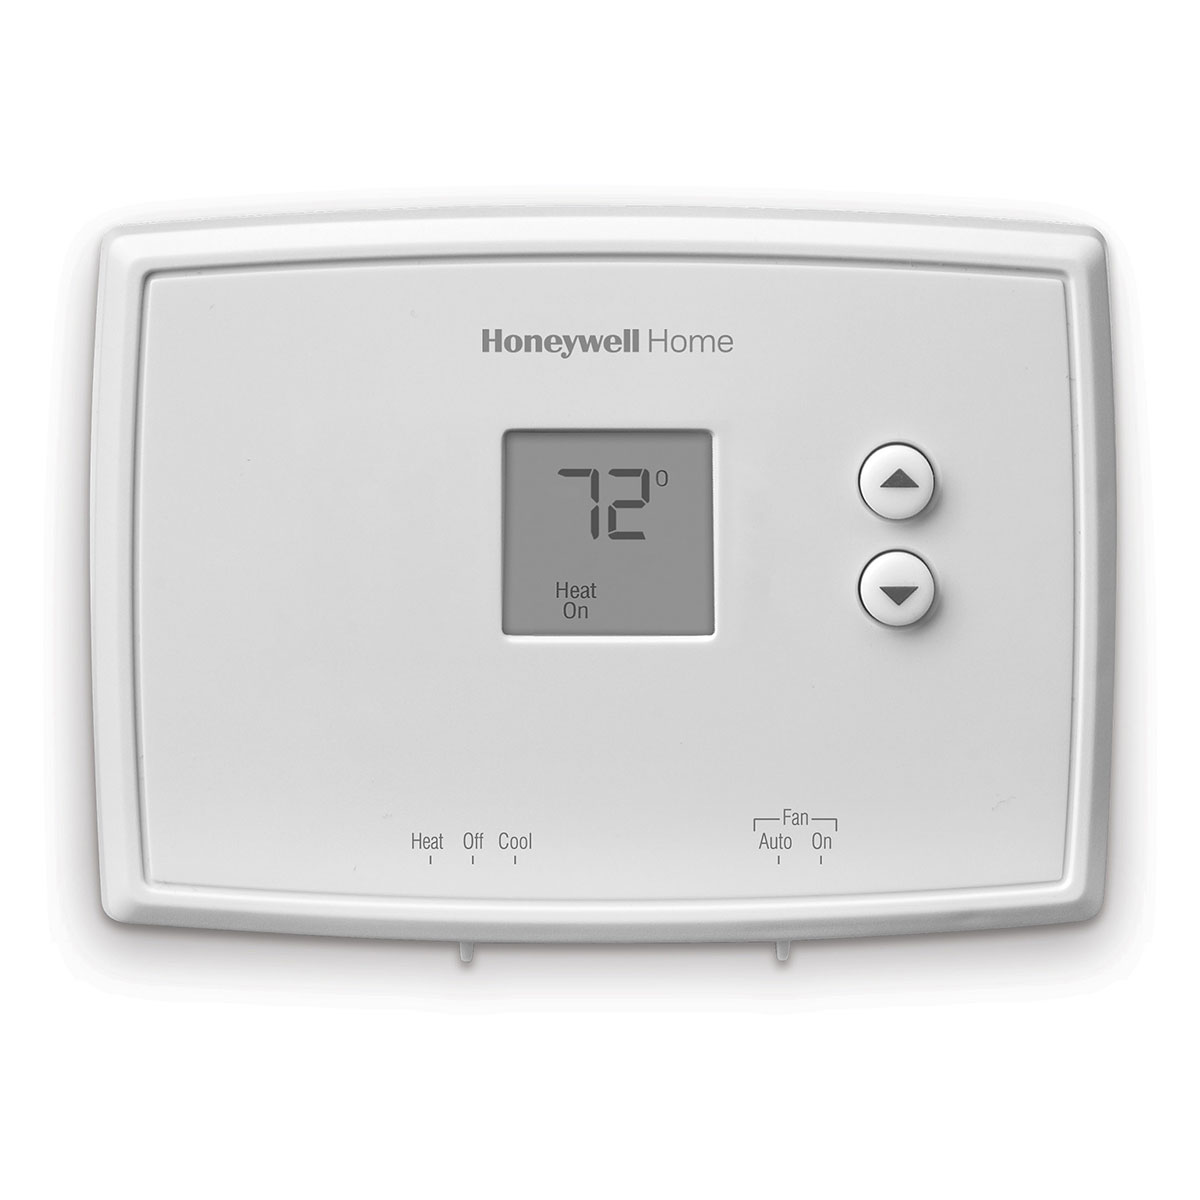 Honeywell Home RTH111B1024 Digital Non-Programmable Thermostat